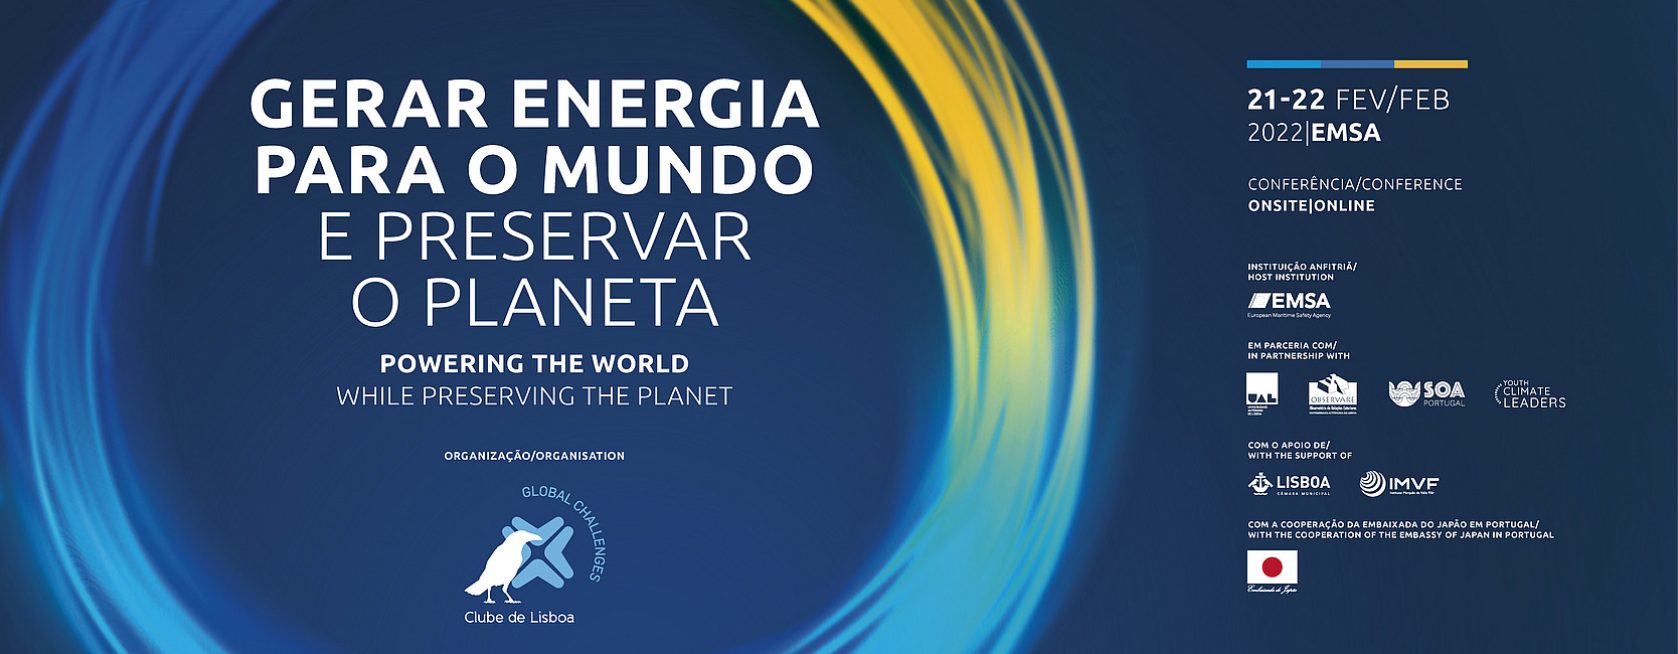 CONFERENCE – POWERING THE WORLD WHILE PRESERVING THE PLANET